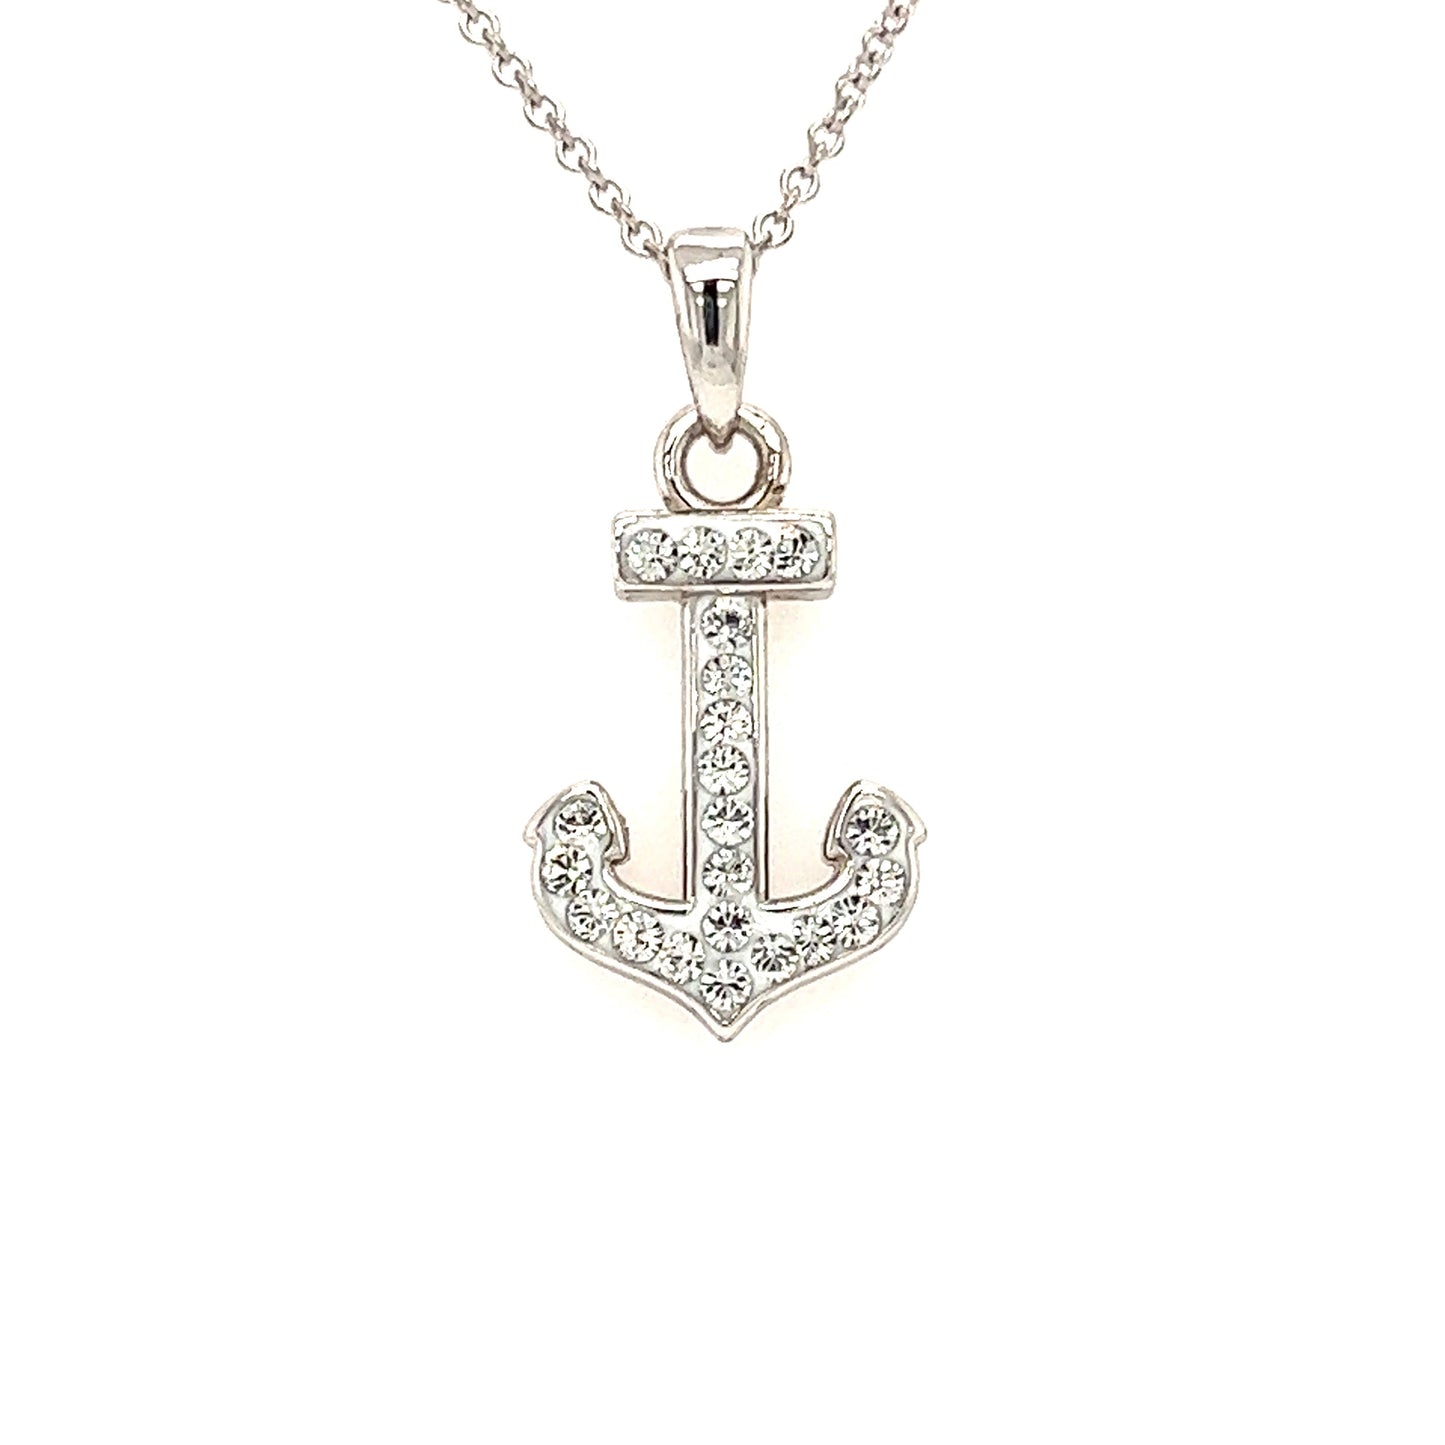 Anchor Necklace with White Crystals in Sterling Silver Necklace Front View